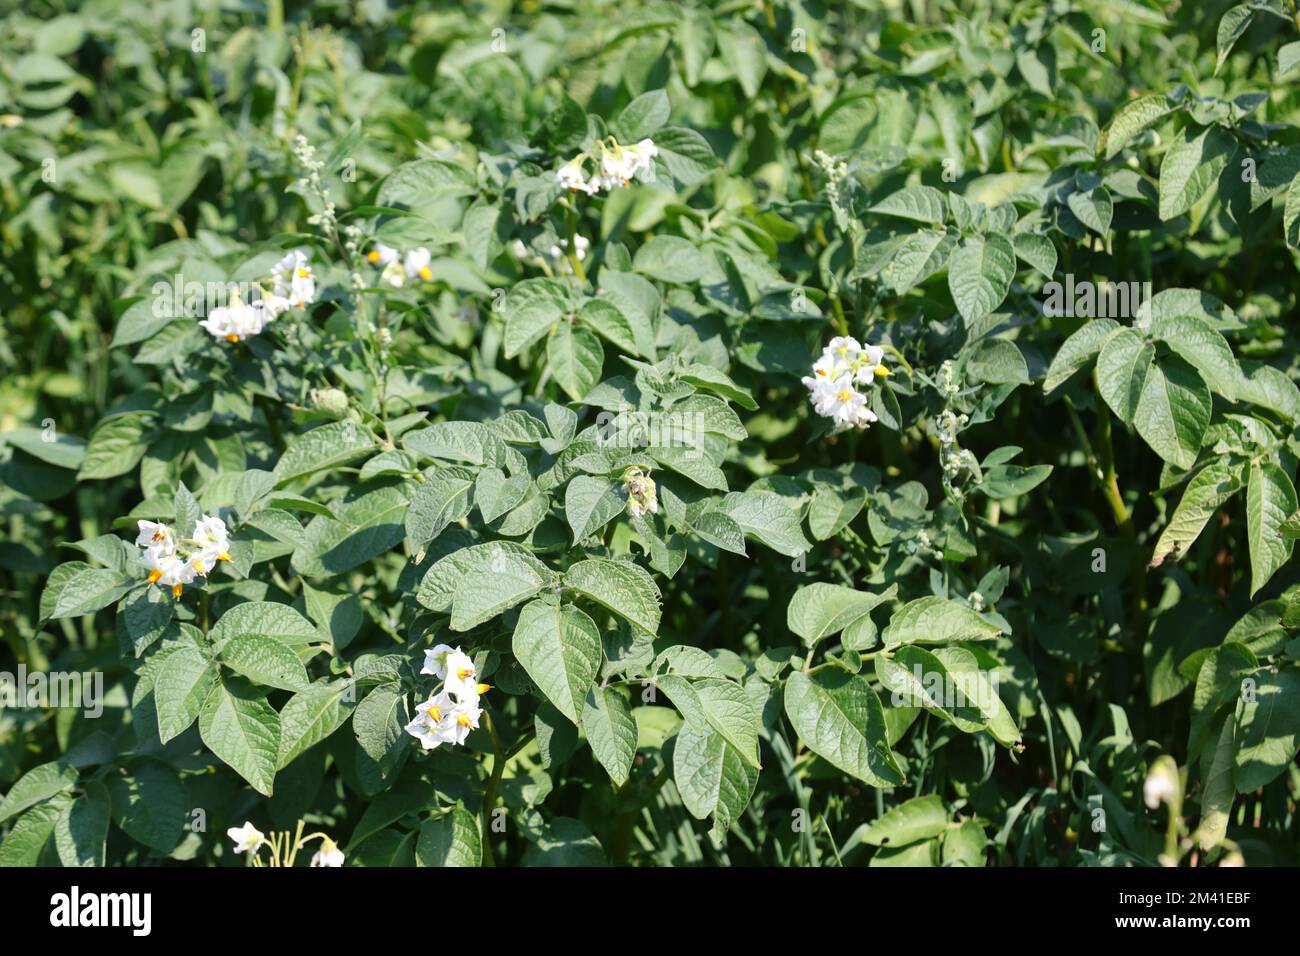 flower and leaves of potato plants grown in the mountains in summer Stock Photo